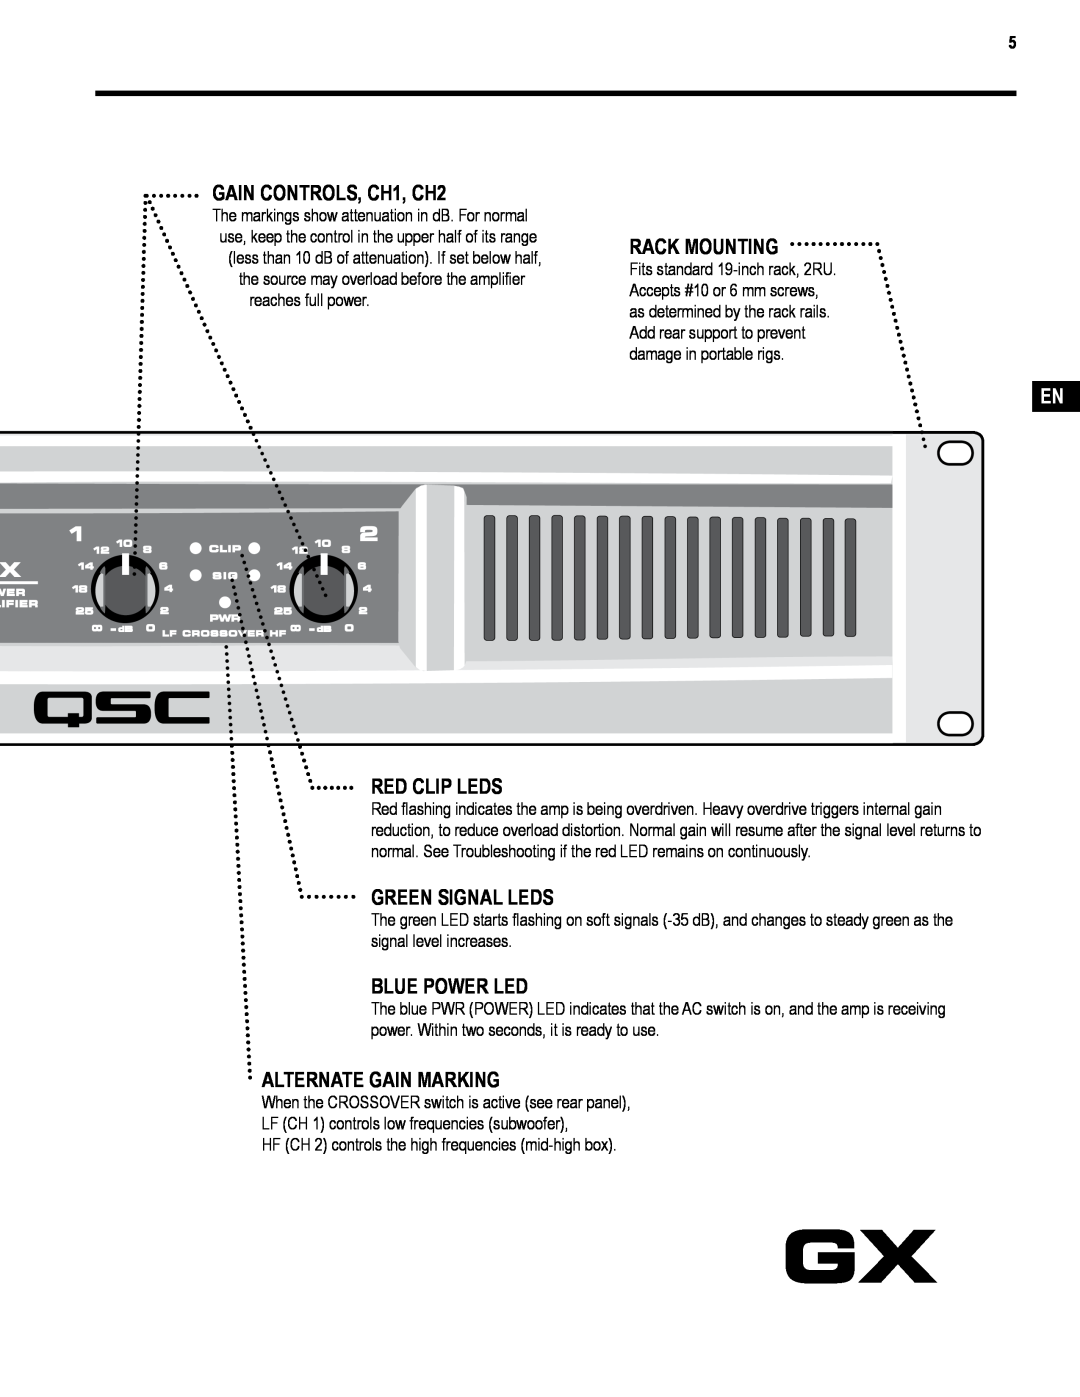 QSC Audio TD-000271-01 user manual GAIN CONTROLS, CH1, CH2, Rack Mounting, Red Clip Leds, Green Signal Leds, Blue Power Led 